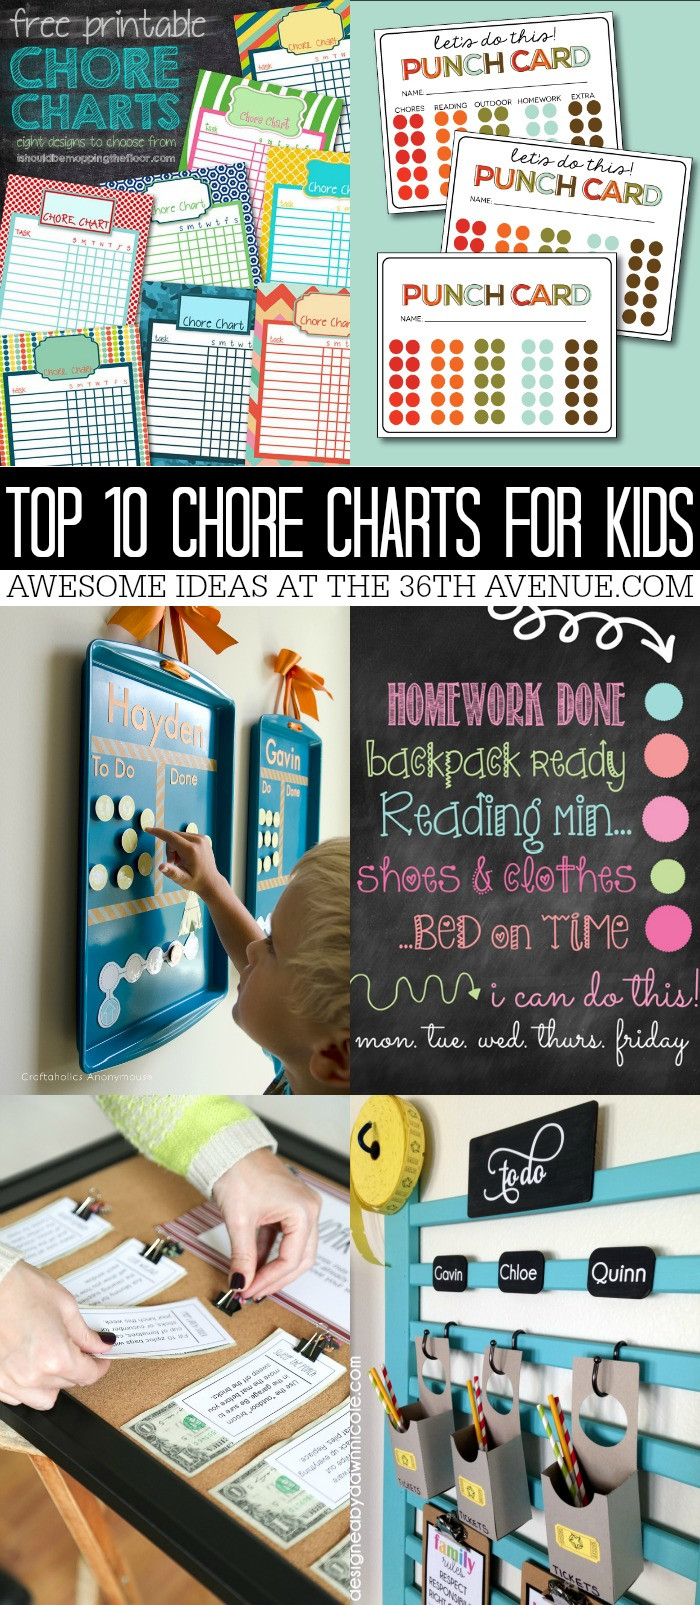 DIY Chore Charts For Kids
 The 36th AVENUE Chores Charts for Kids